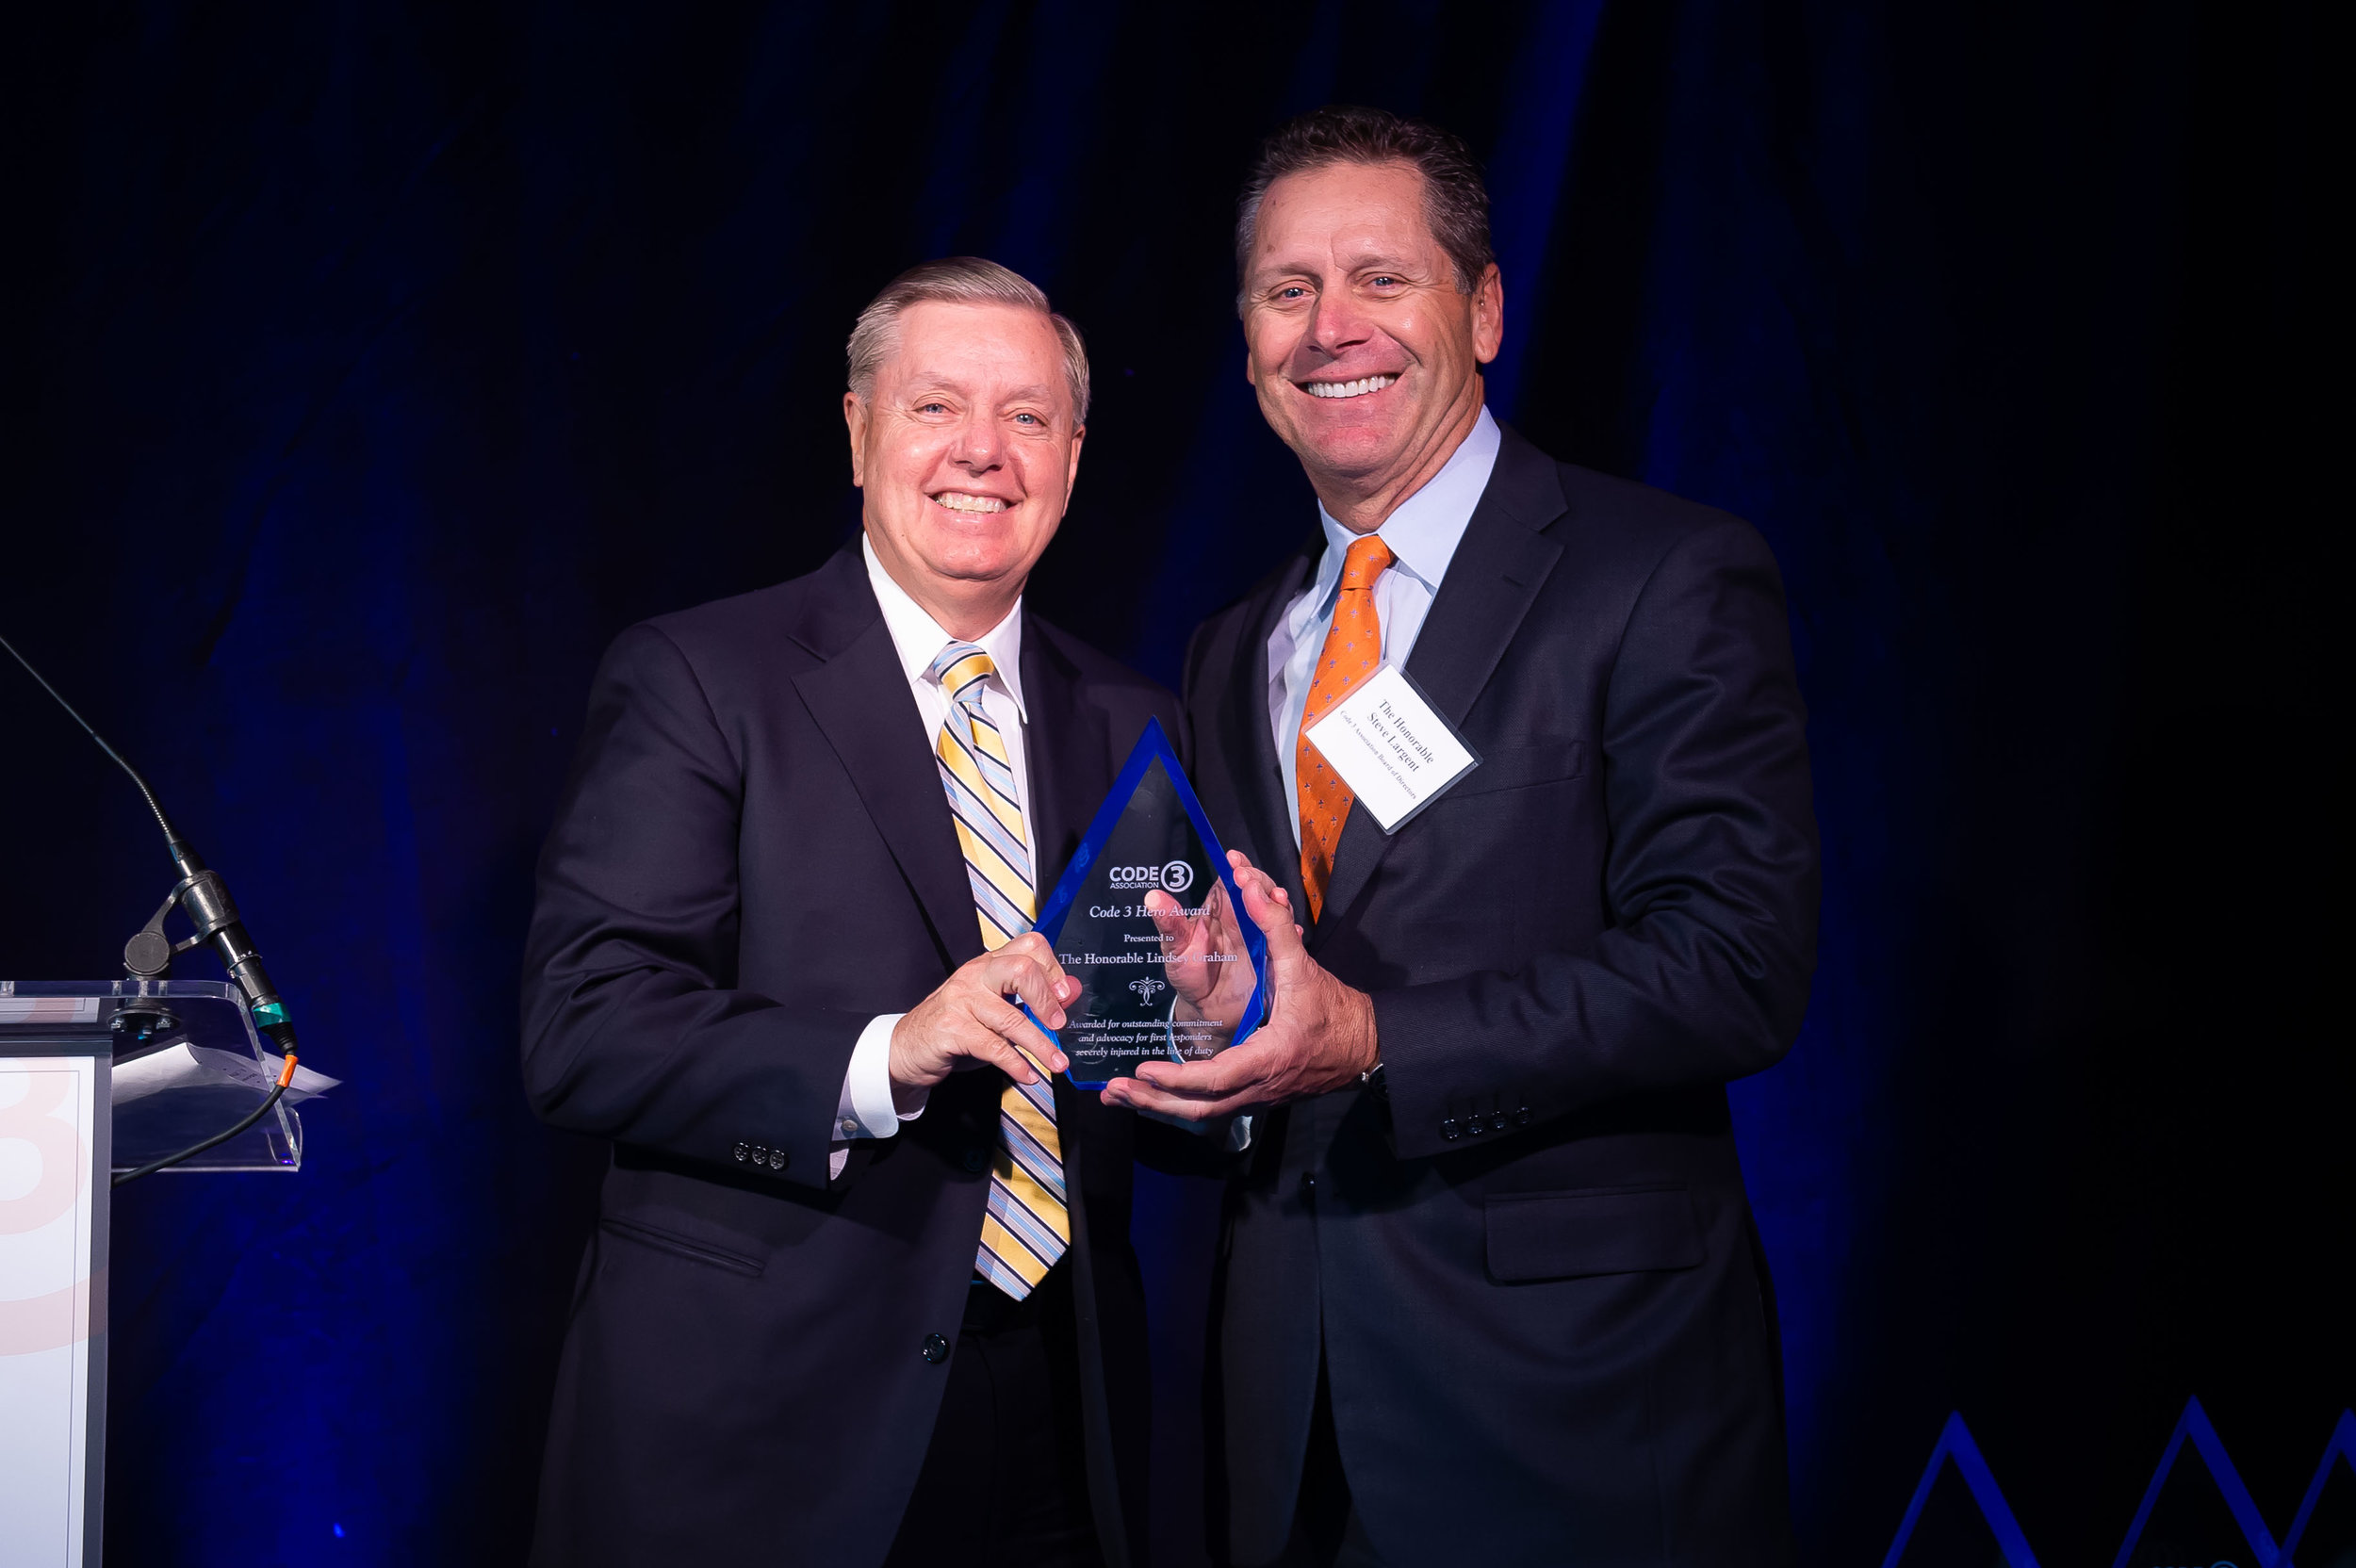 The Honorable Steve Largent of the Code 3 Board of Directors, presents Sen. Lindsey Graham with the Code 3 Heroes Award, Sen. Graham is one of four recipients of this honor this year.